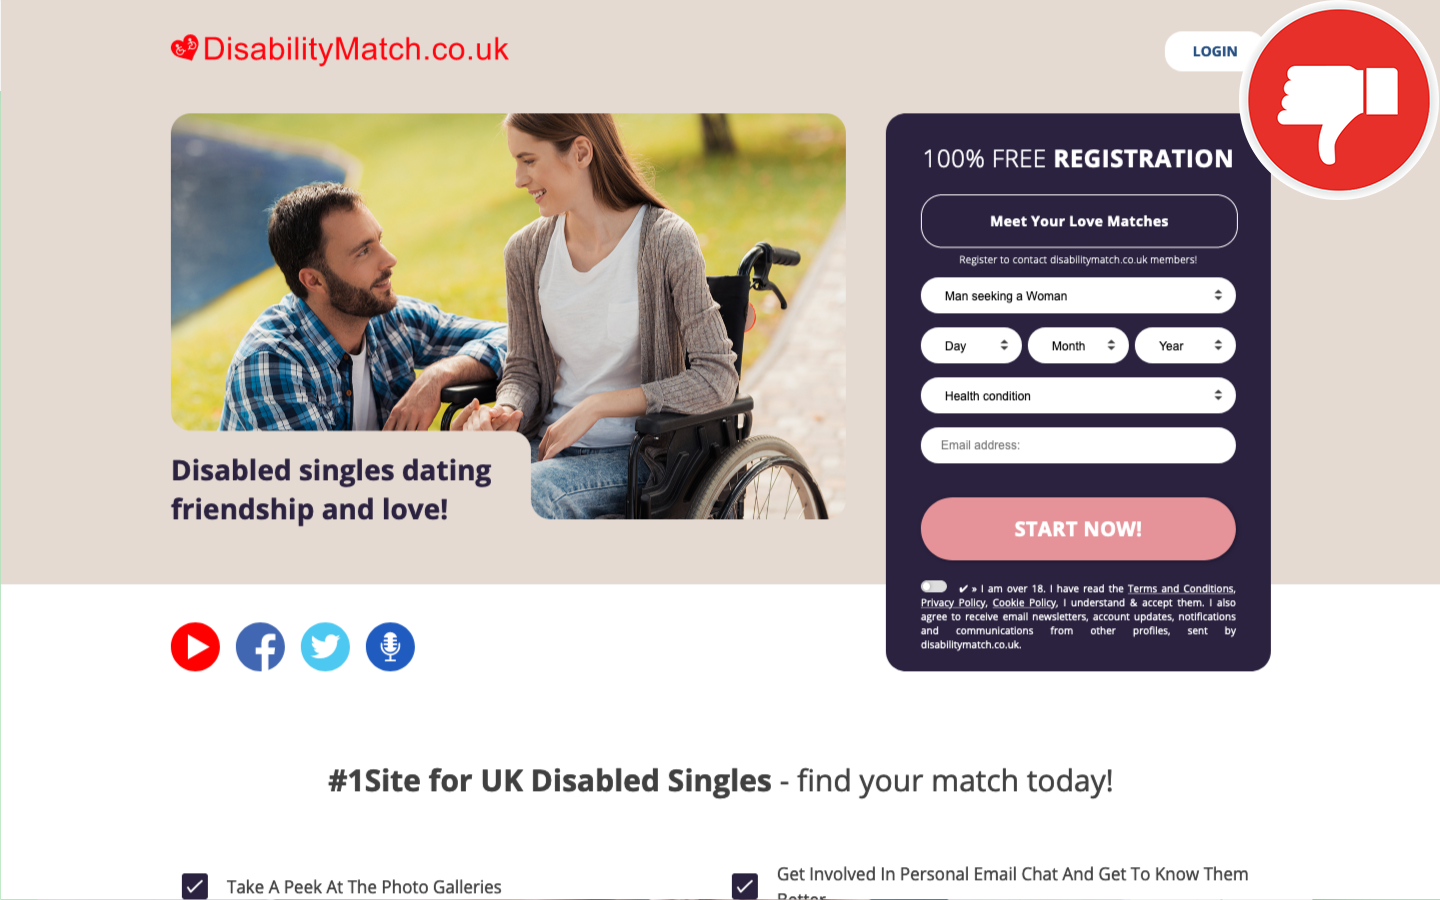 Review DisabilityMatch.co.uk scam